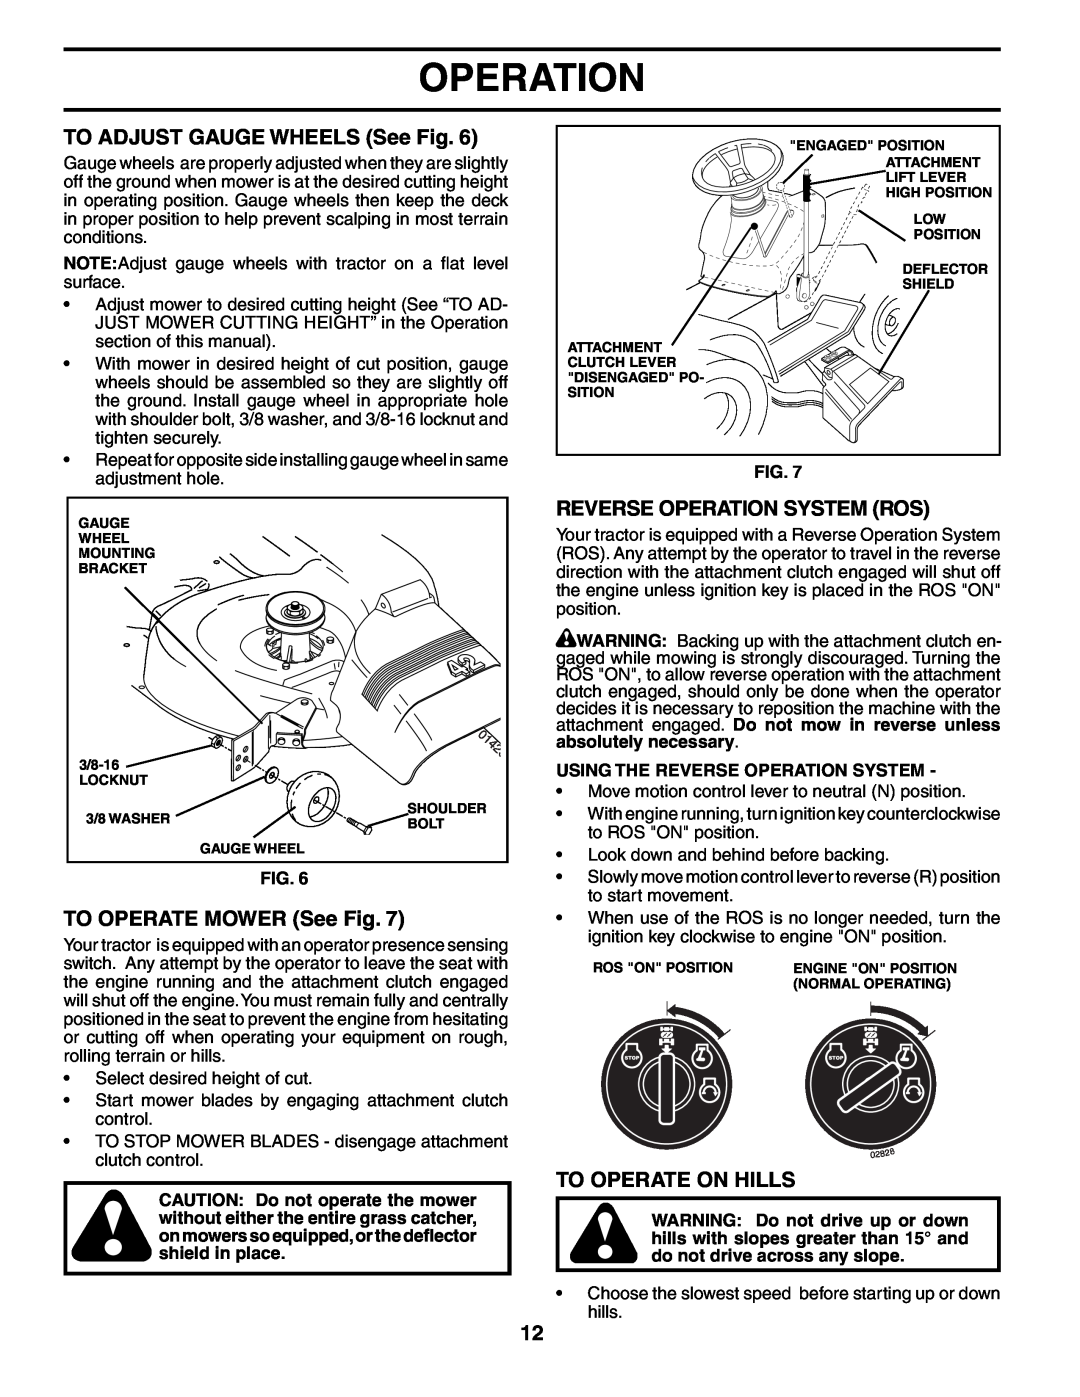 Poulan PK19H42LT manual TO ADJUST GAUGE WHEELS See Fig, TO OPERATE MOWER See Fig, Reverse Operation System Ros 